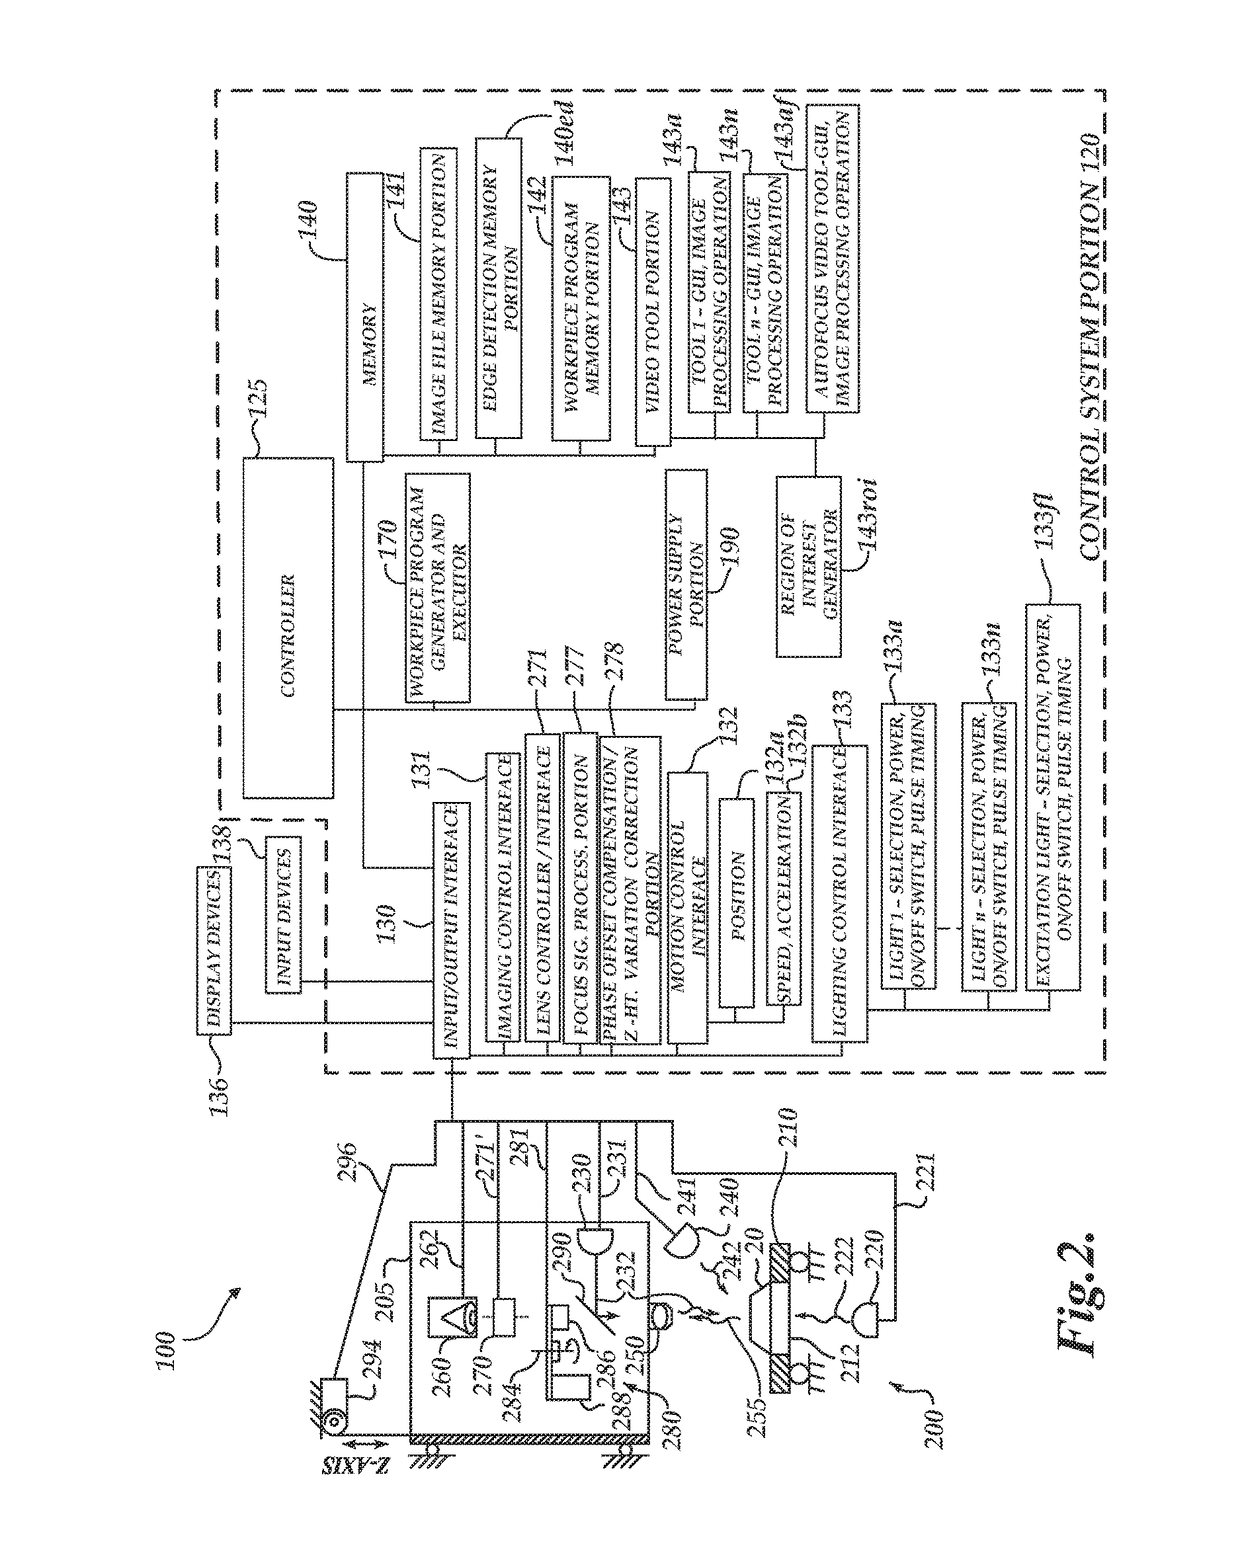 Autofocus system for a high speed periodically modulated variable focal length lens